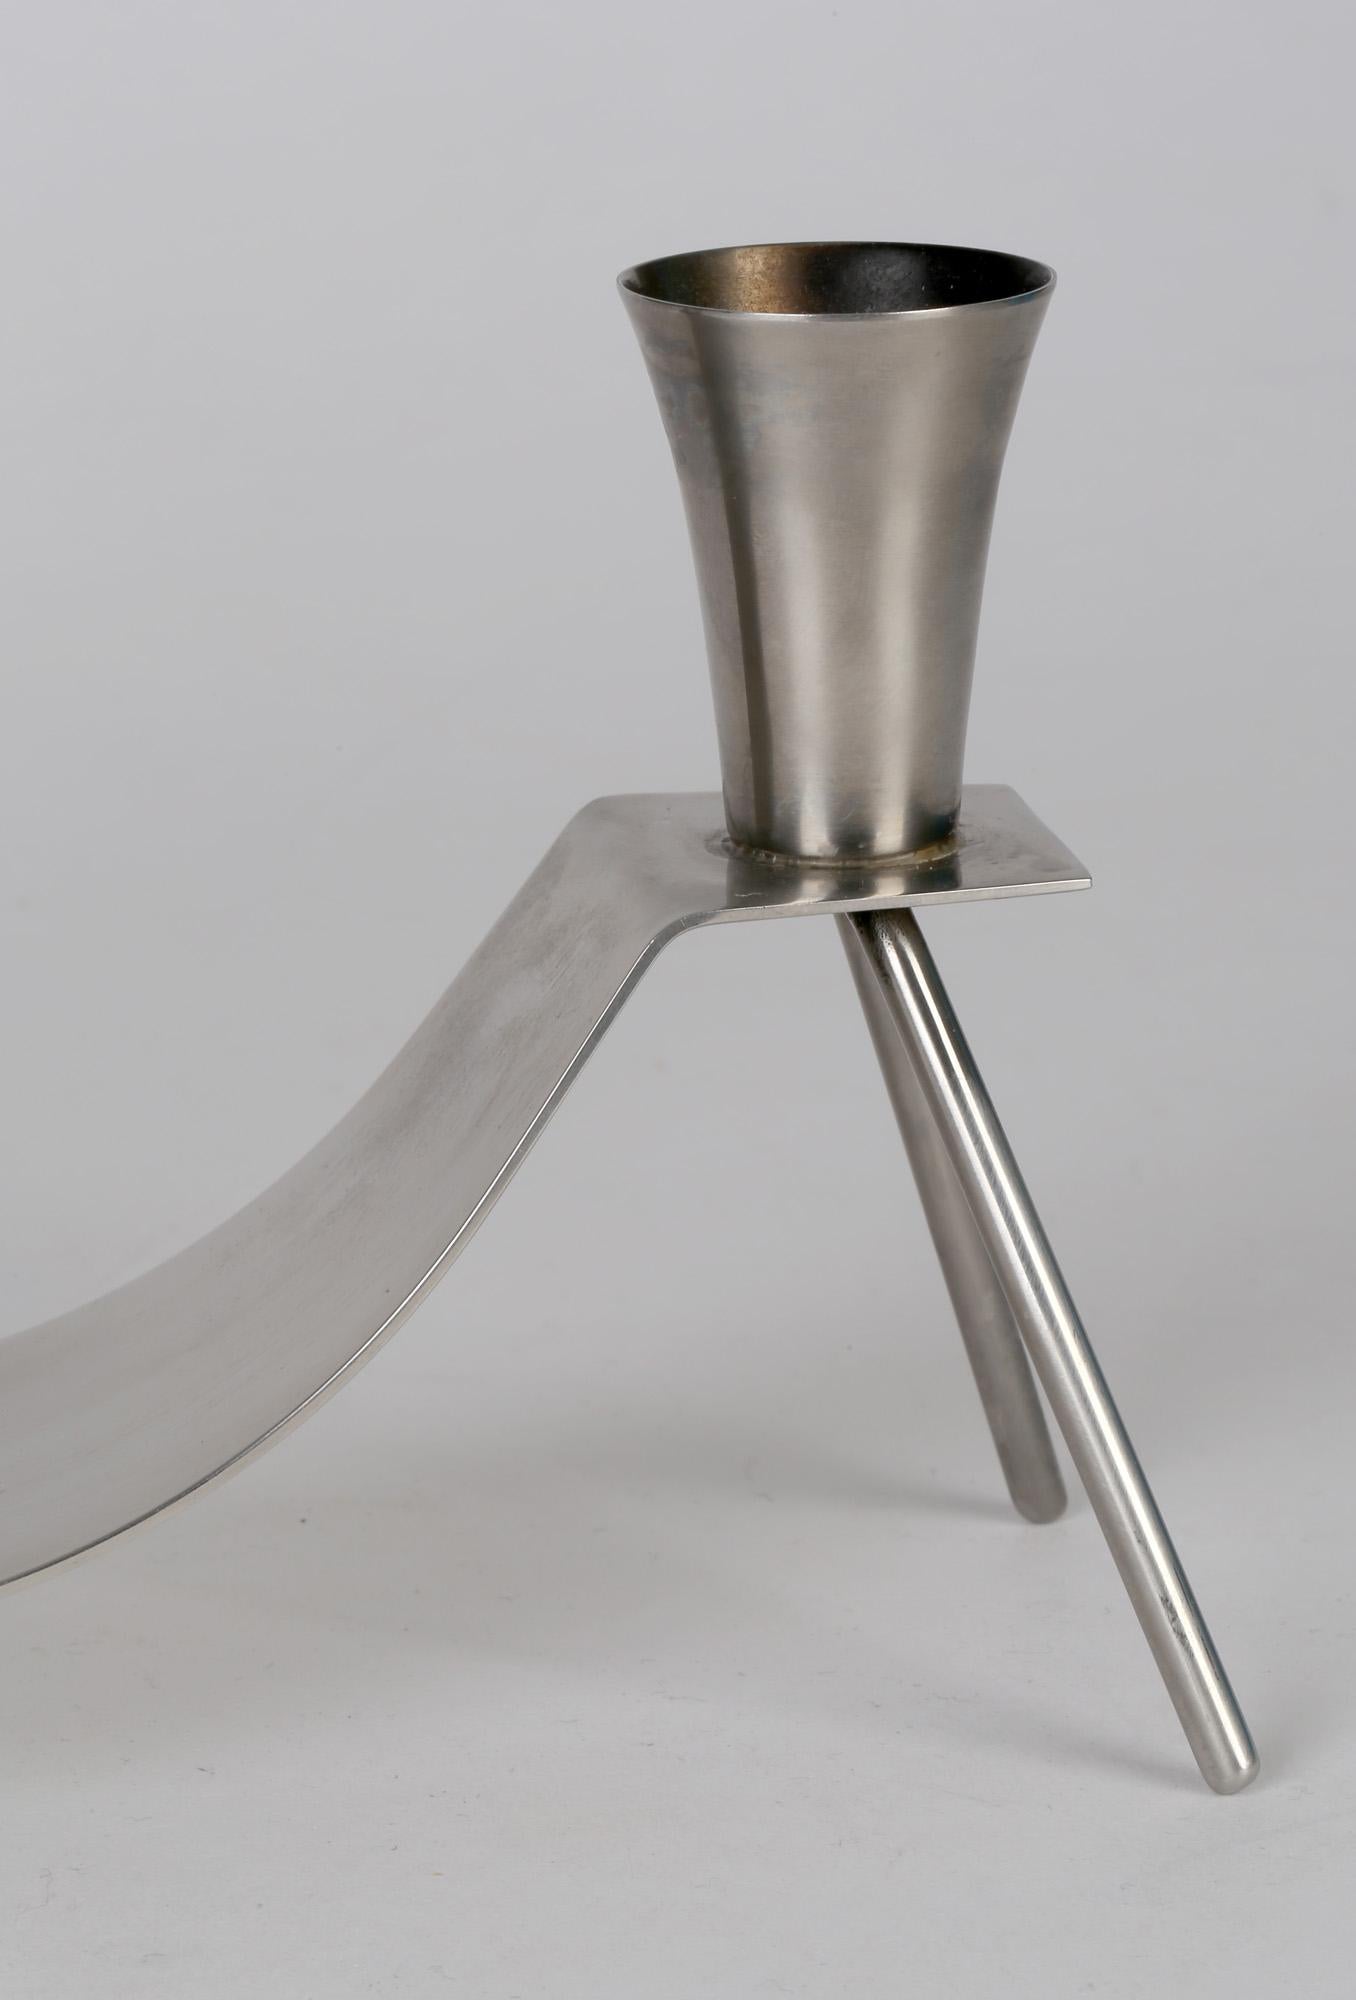 A very stylish Danish mid-century brushed stainless steel twin candlestick by Dana DFA. The twin candlestick is mounted on a shaped flat steel sheet supported on four tripod style legs. This simple yet very effective design is typical of Danish